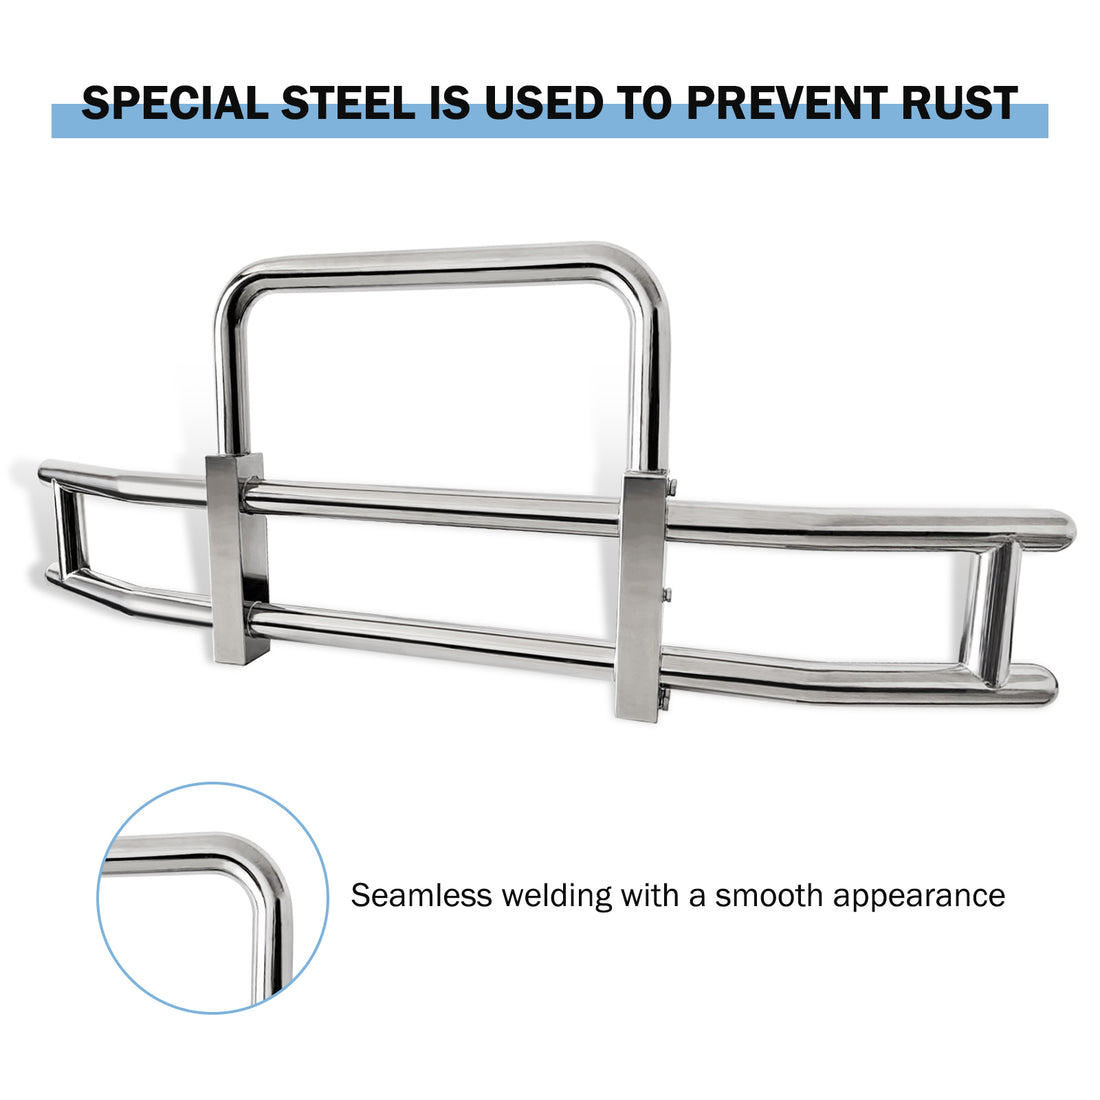 Detachable stainless steel front bumper S76h750